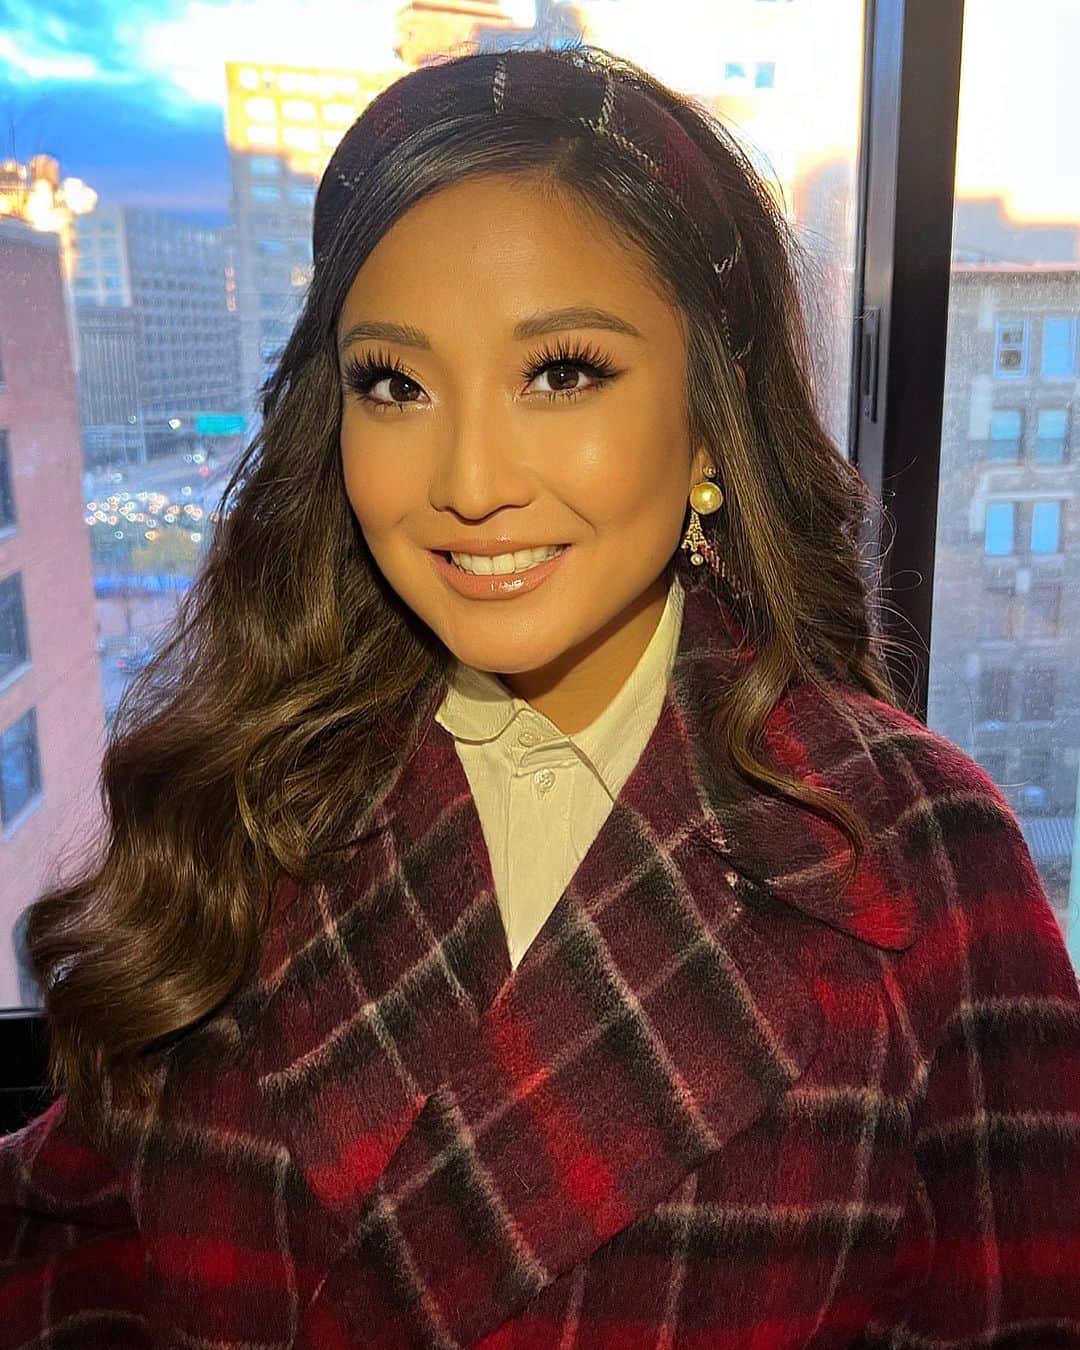 Carolina Gonzalezのインスタグラム：「🍁A S H L E Y🤎 @ashleyparklady Today for the @macys Thanksgiving Day Parade🦃🍁🧡  Hair @djquintero  Makeup by me @cgonzalezbeauty  #AshleyPark  #CGonzalezBeauty    Using:    @wareforall  SONNY spf40 Face Serum    @mariobadescu  Lip Mask    @armanibeauty   Luminous Silk Concealer 5.75, 6.5  Luminous Silk Foundation 5.8, 5.9  Luminous Silk Glow Liquid Bronzer 100  Luminous Silk Glow Setting Powder 6, 9  Luminous Silk Glow Blush 11  Eye Tint 99  Eyes To Kill Mascara Classico  Lip Power 103    @tartecosmetics  ManEater AfterDark Eyeshadow Palette    @westmanatelier  Contour Stick in Biscuit, Truffle    @houseoflashes  Boudoir」